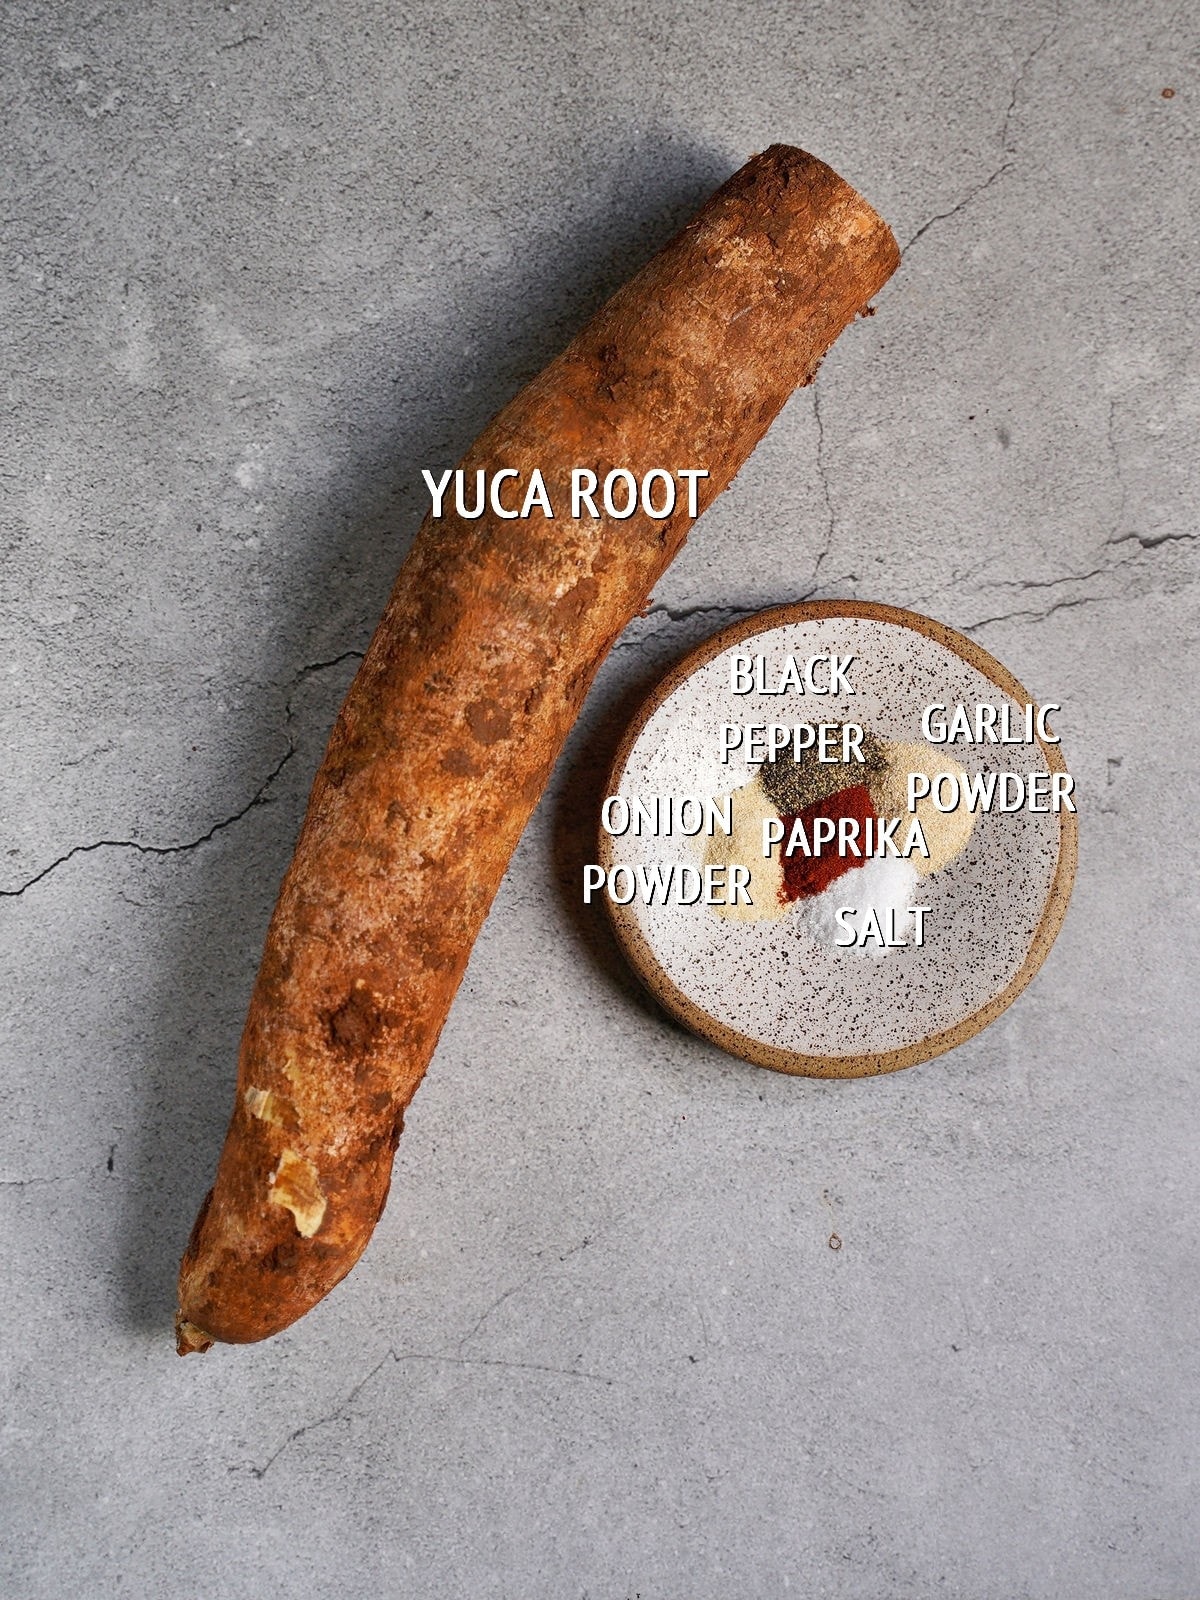 ingredients for yuca fries with labels